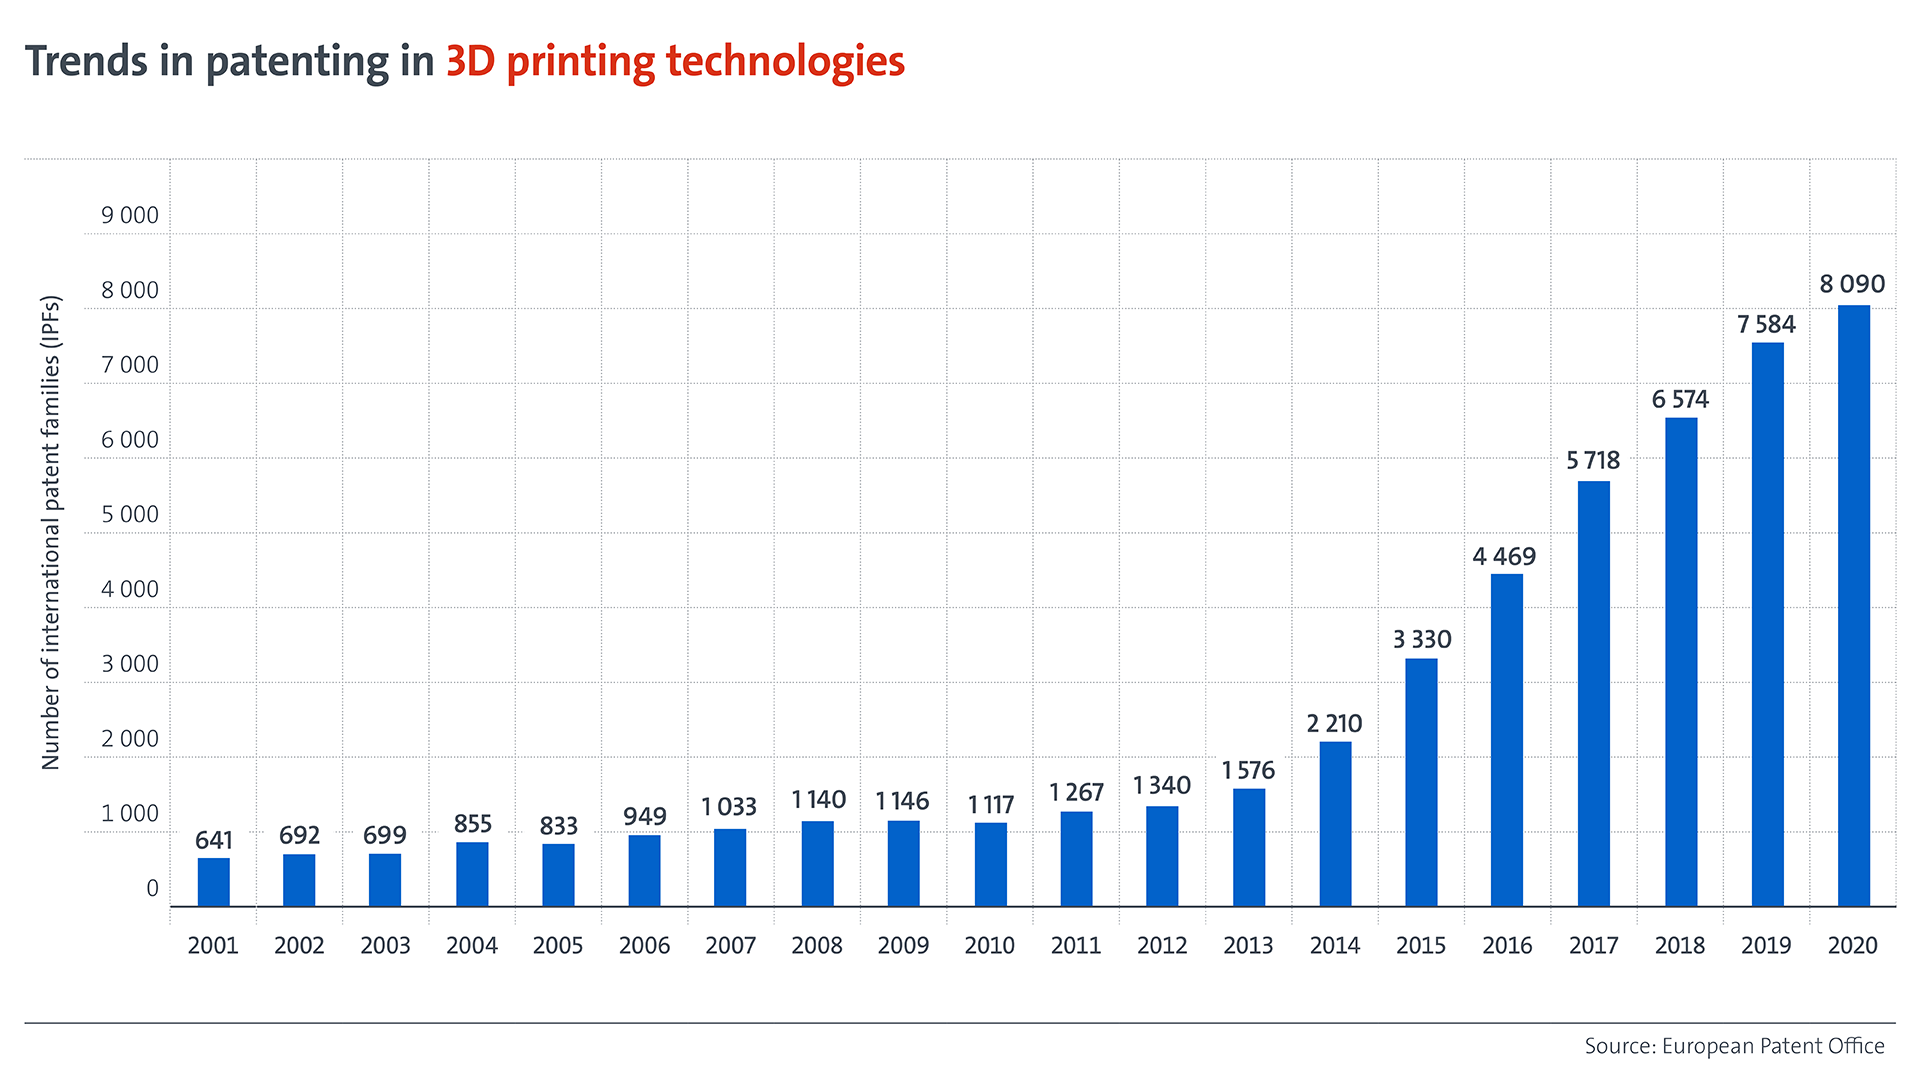 Trends in patenting in 3D printing technologies